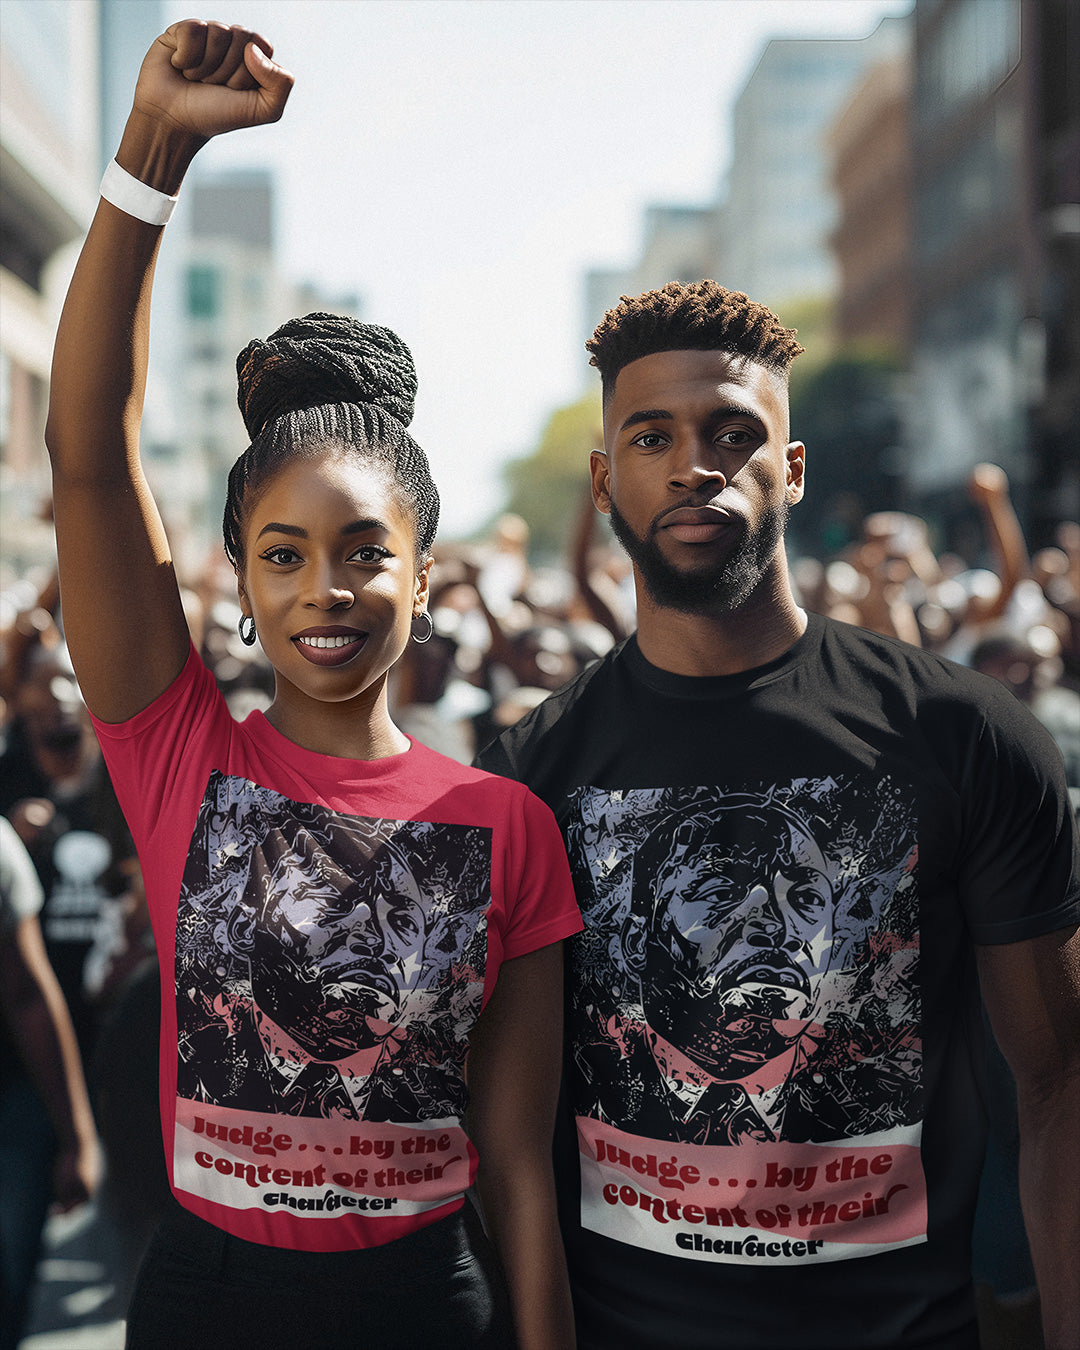 Judge by the Content of Their Character: Honoring MLK's Message with Tee Shirts